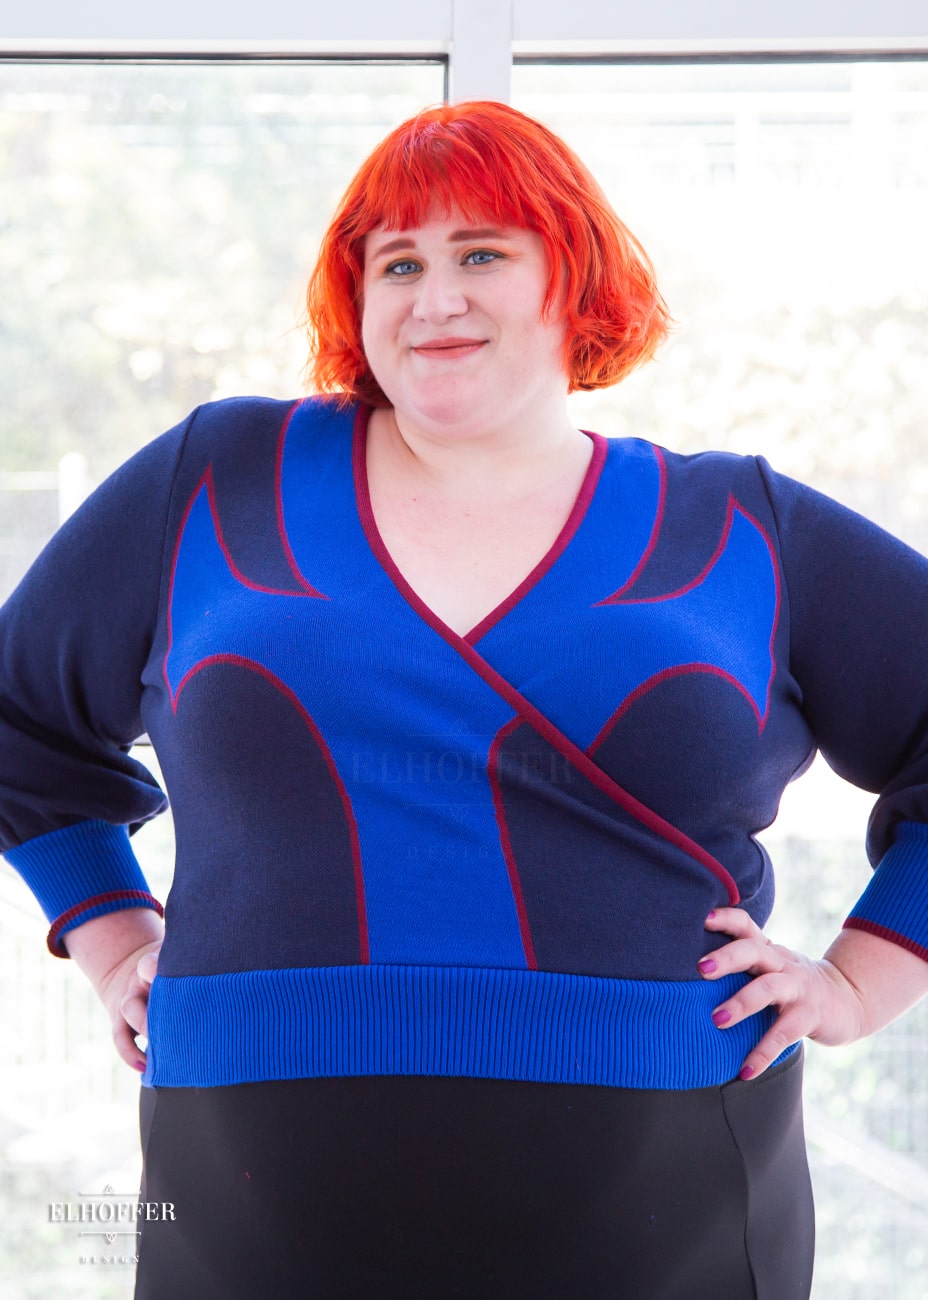 Logan, a fair skinned size 3XL model with bright orange hair and bangs, is wearing a crossover knit crop top. The base is a dark blue, details are bright blue with a red outline and form almost a t shape in the middle of the crop. The cuffs and bottom are the same bright blue of the detail and the crossover is piped in the same red.